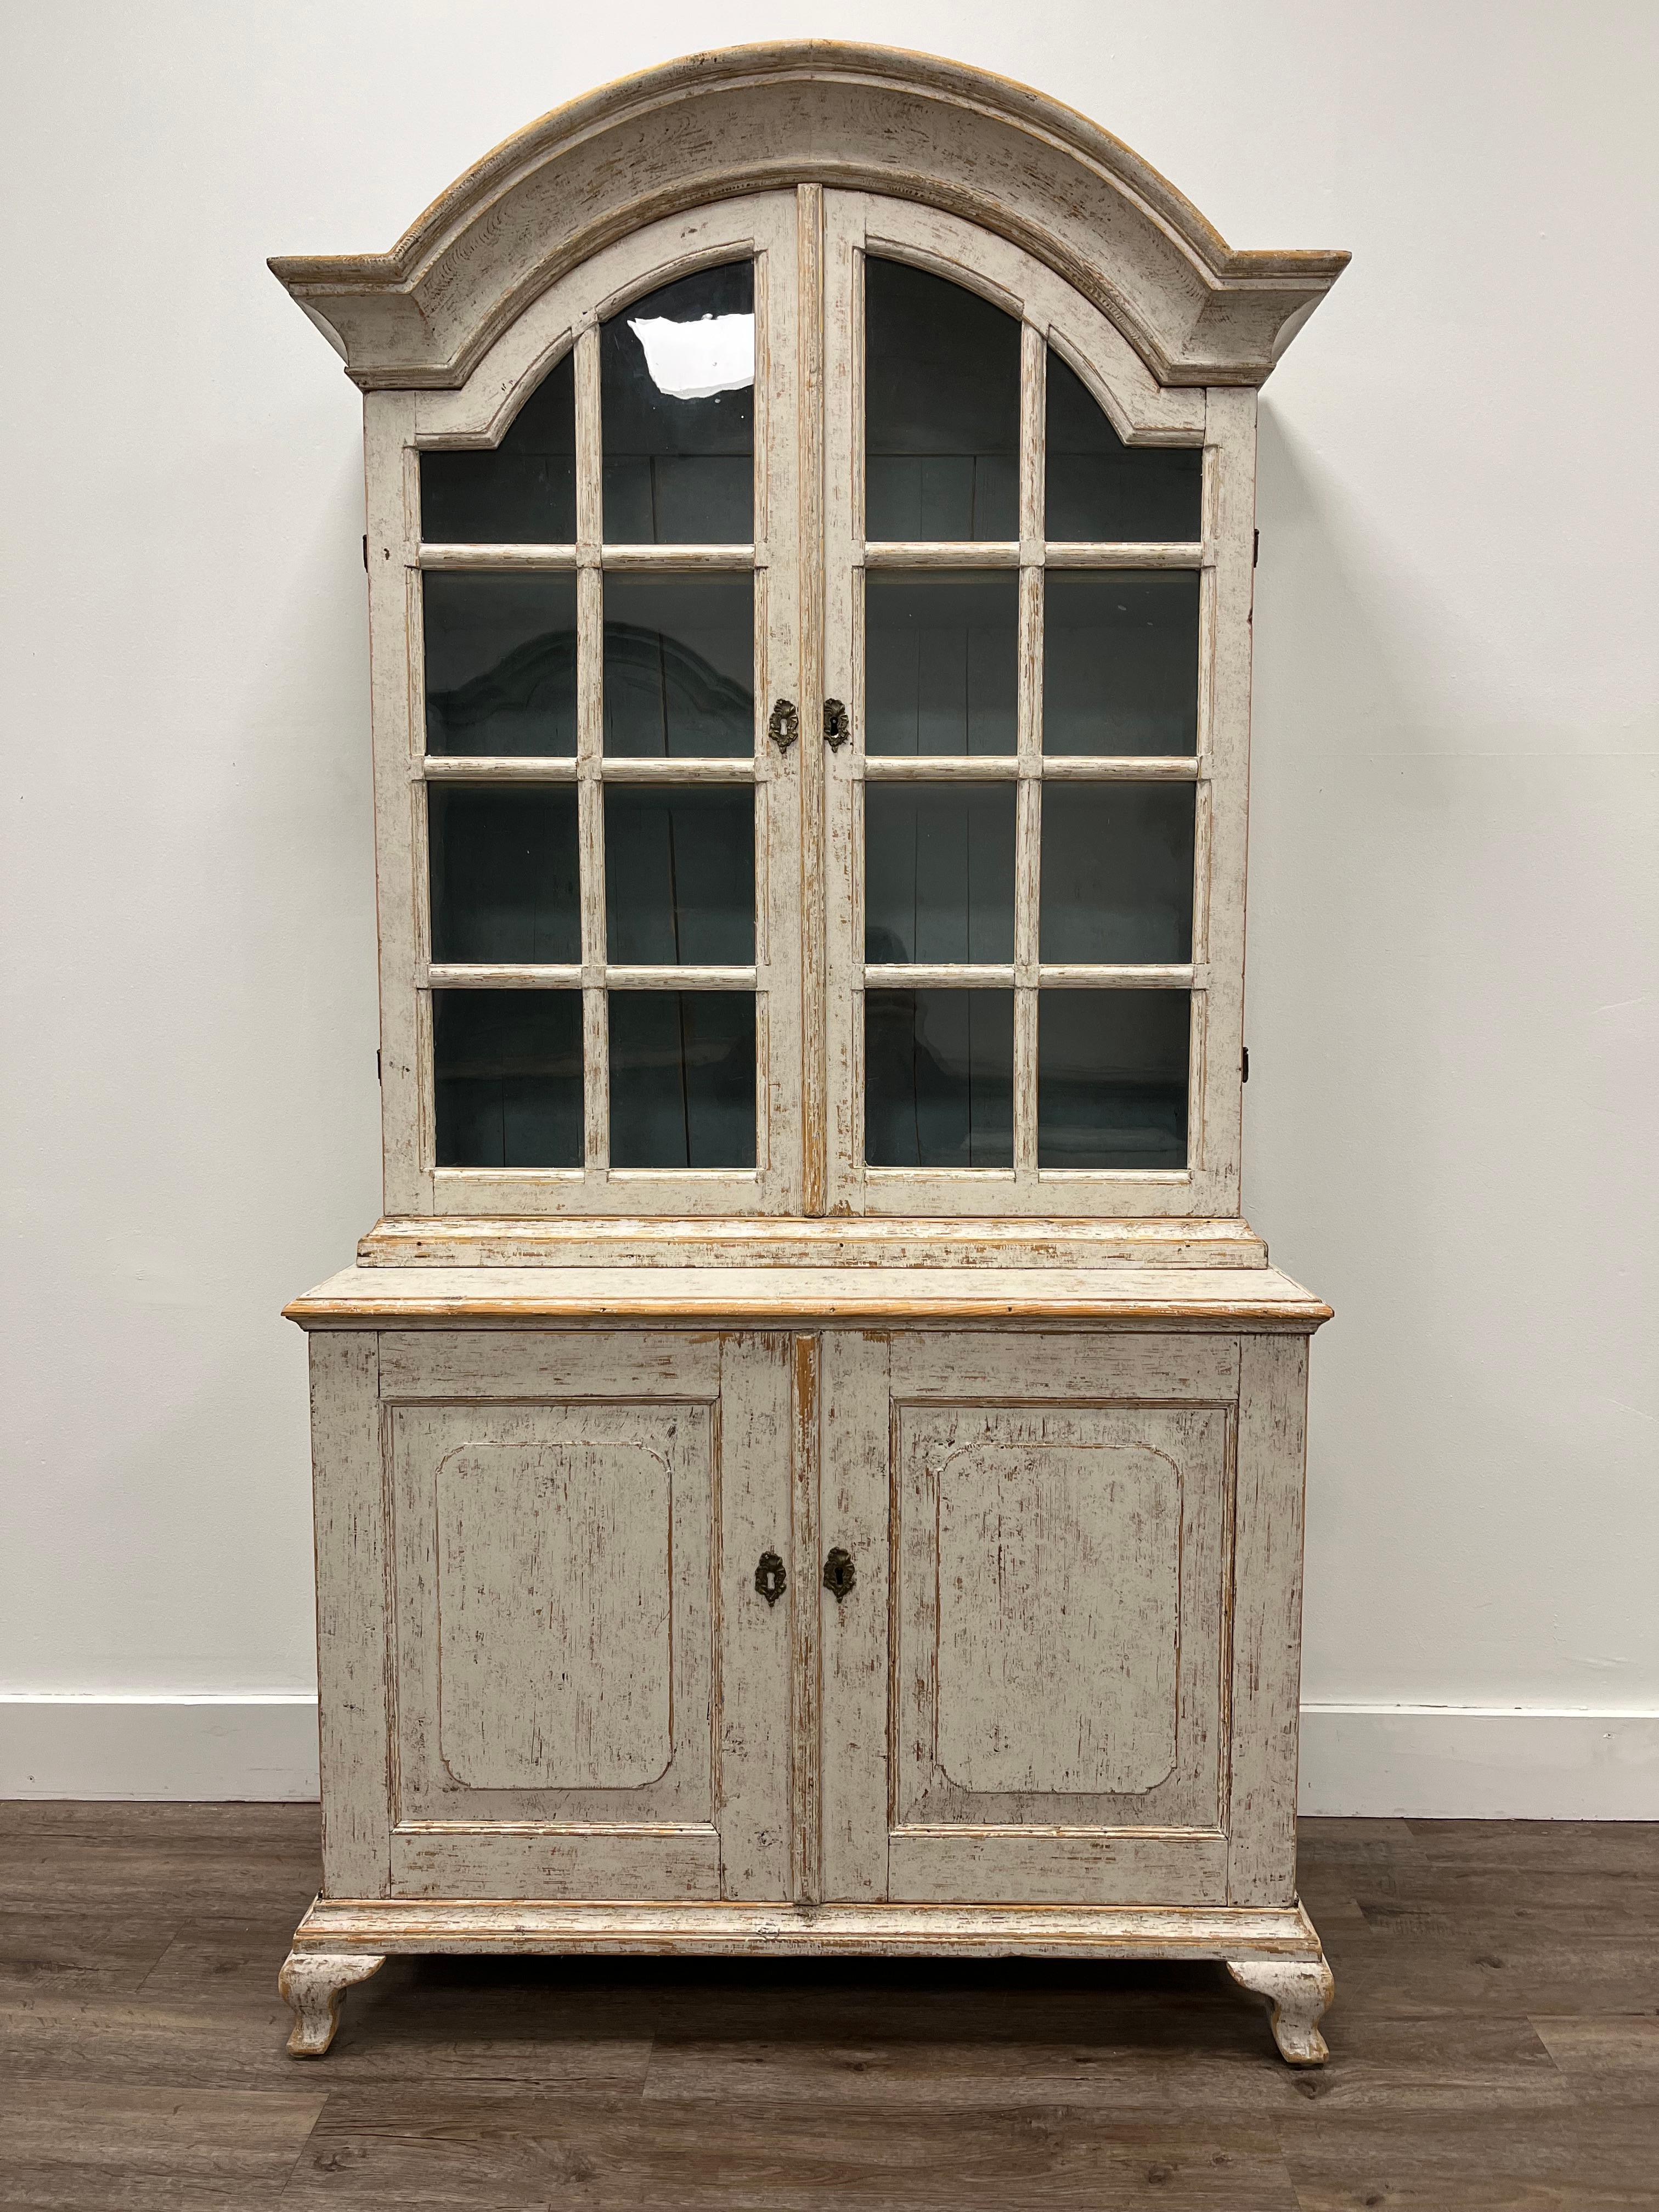 A beautiful Rococo vitrine with original brass hardware and locks. The upper cabinet has four shelves under a bonnet top with glass doors. The lower cabinet has two shelves behind raised panel doors. Sits atop cabriolet feet. Tastefully repainted